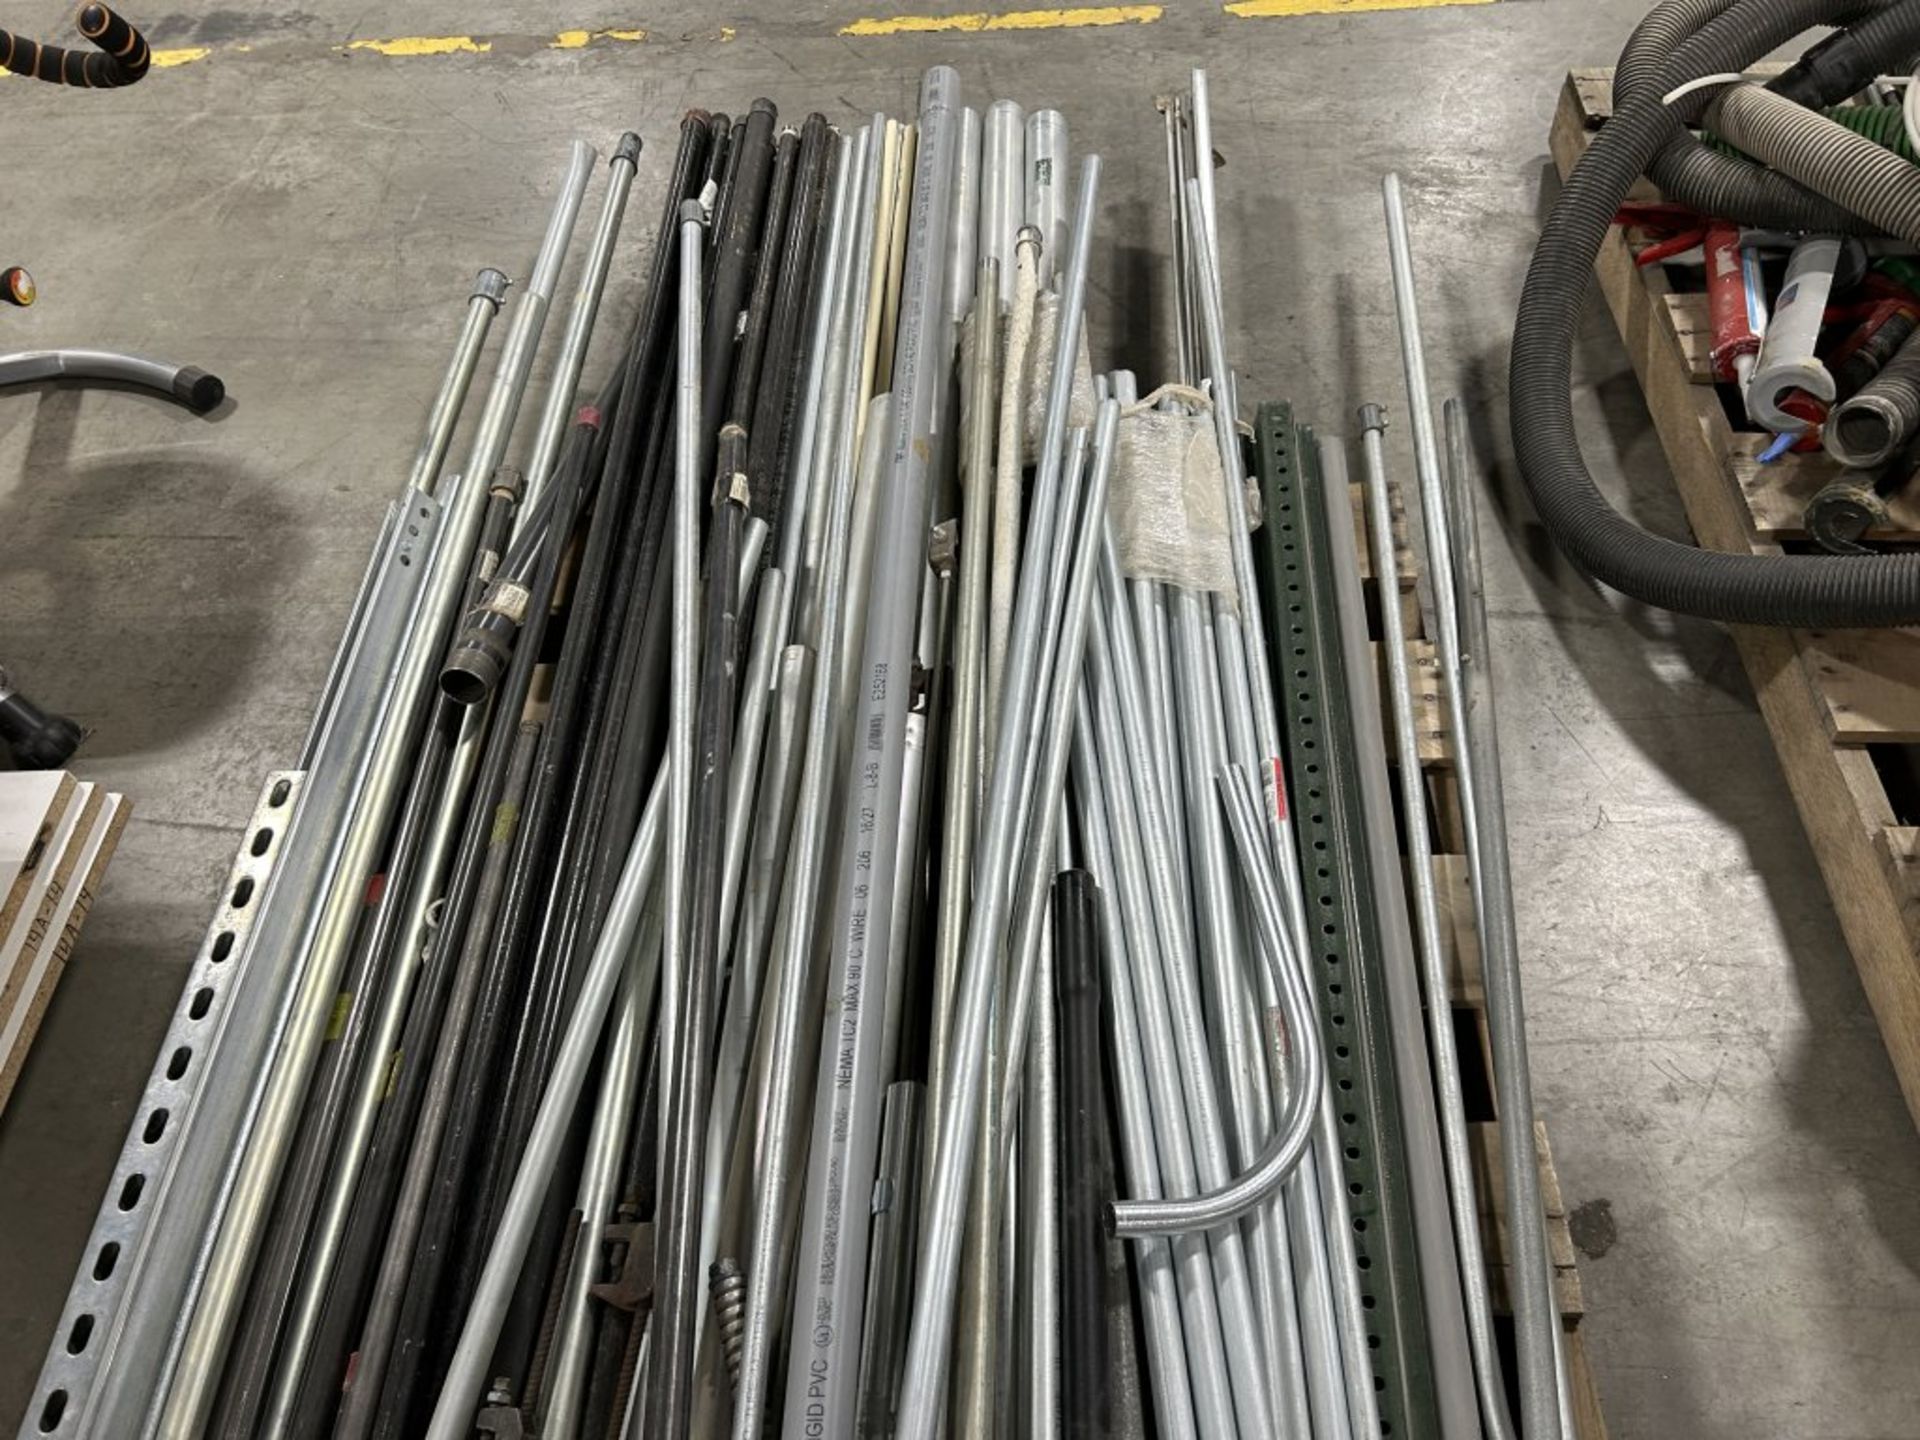 LARGE PILE OF ASSORTED CONDUIT BENDERS, CONDUIT, METAL PIPES, T-POSTS, ETC. - Image 5 of 5